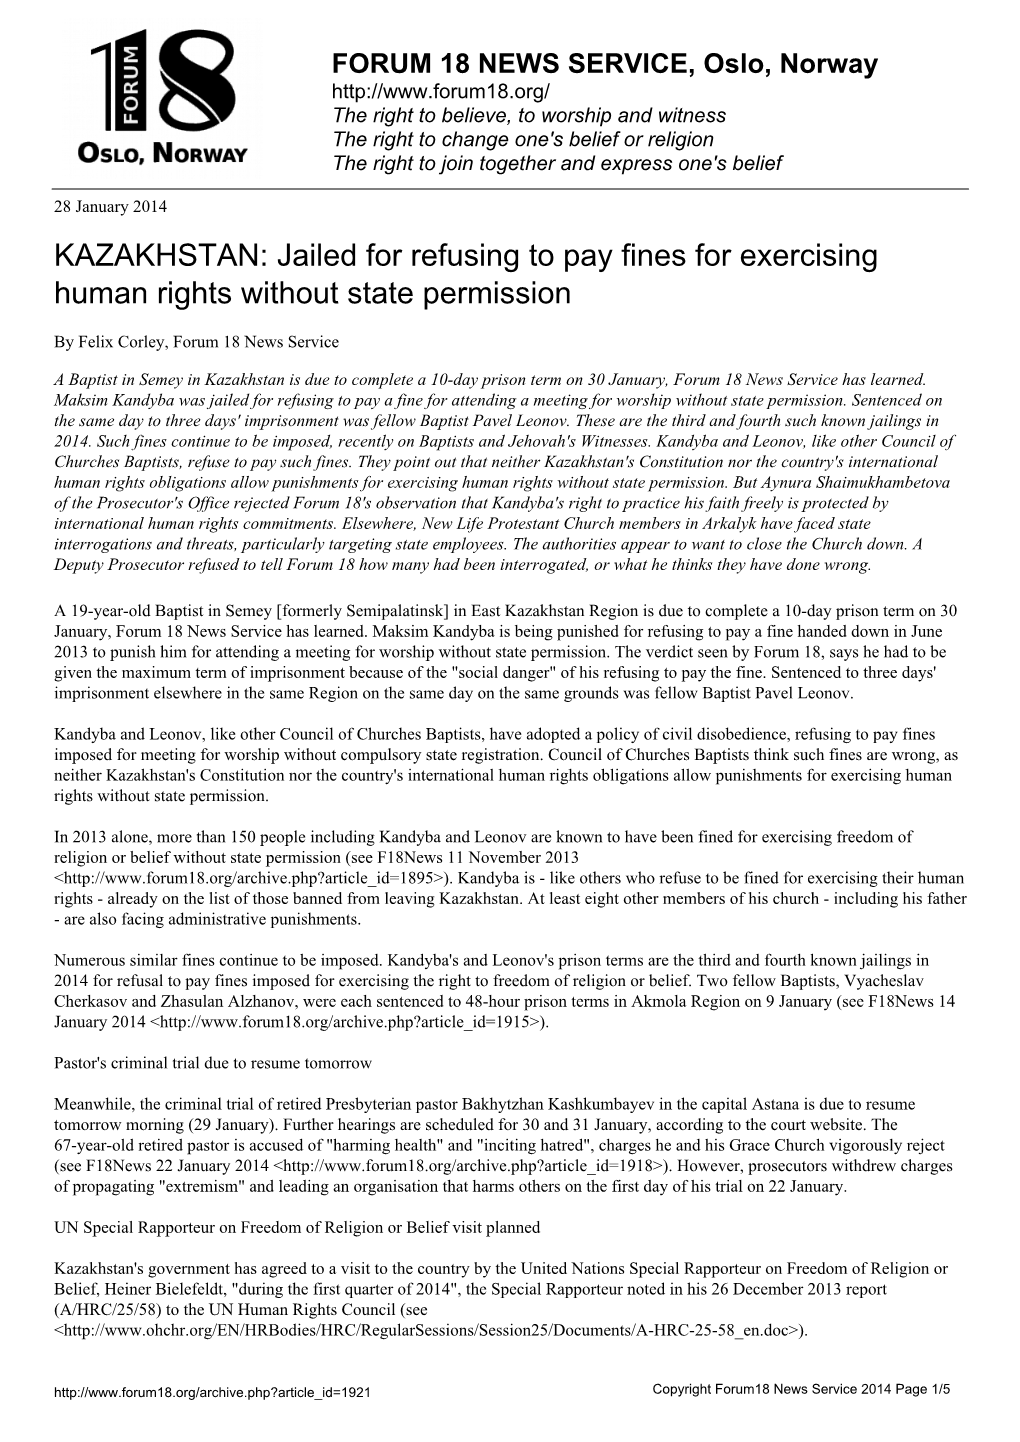 KAZAKHSTAN: Jailed for Refusing to Pay Fines for Exercising Human Rights Without State Permission